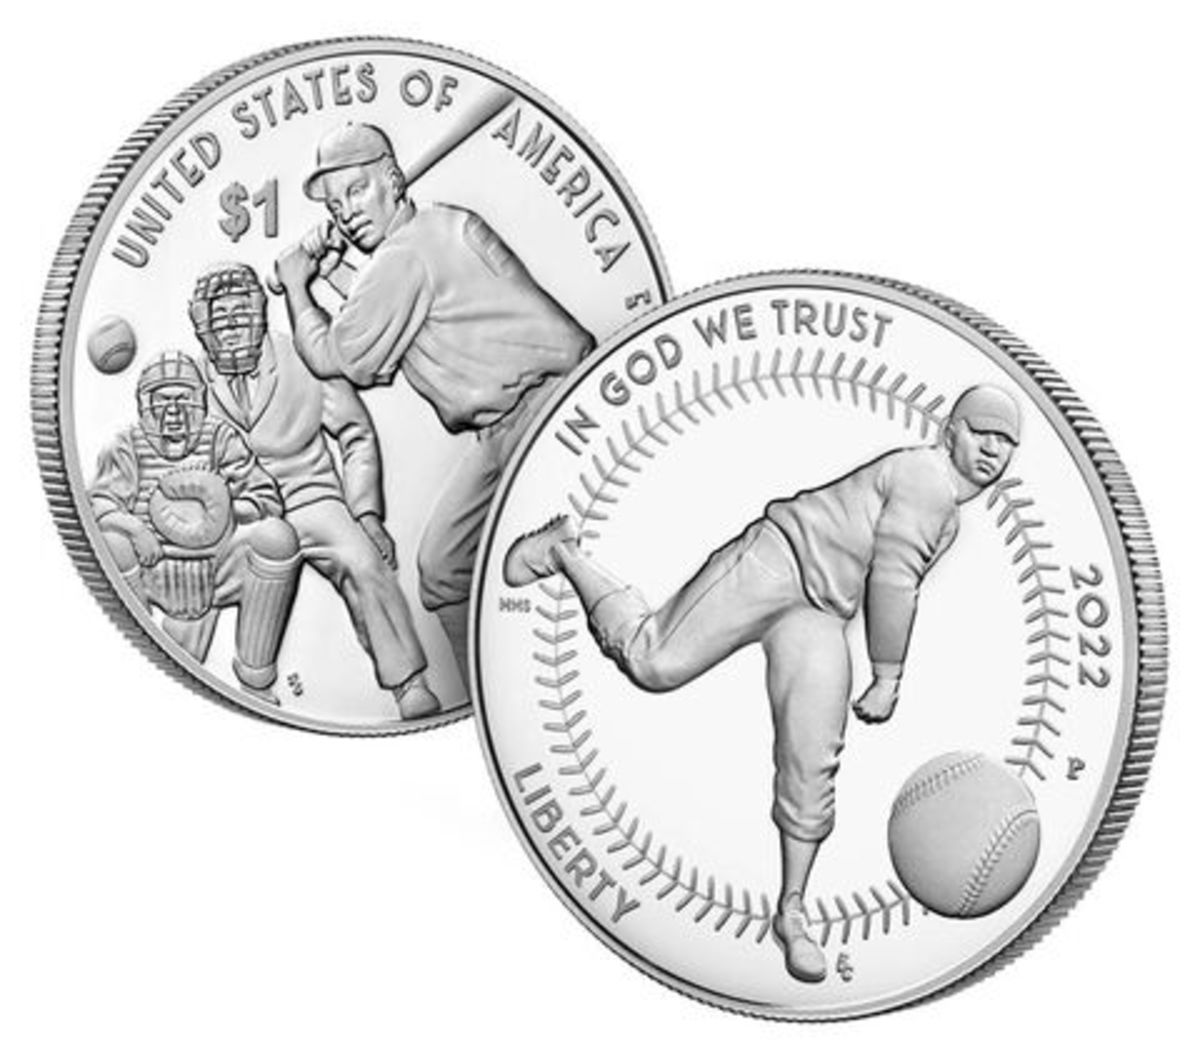 The silver dollar’s obverse depicts a pitcher in mid-throw with the baseball in the foreground and baseball stitching as a border. The reverse design depicts a player’s-eye view of a pitch being delivered to the catcher at the plate.